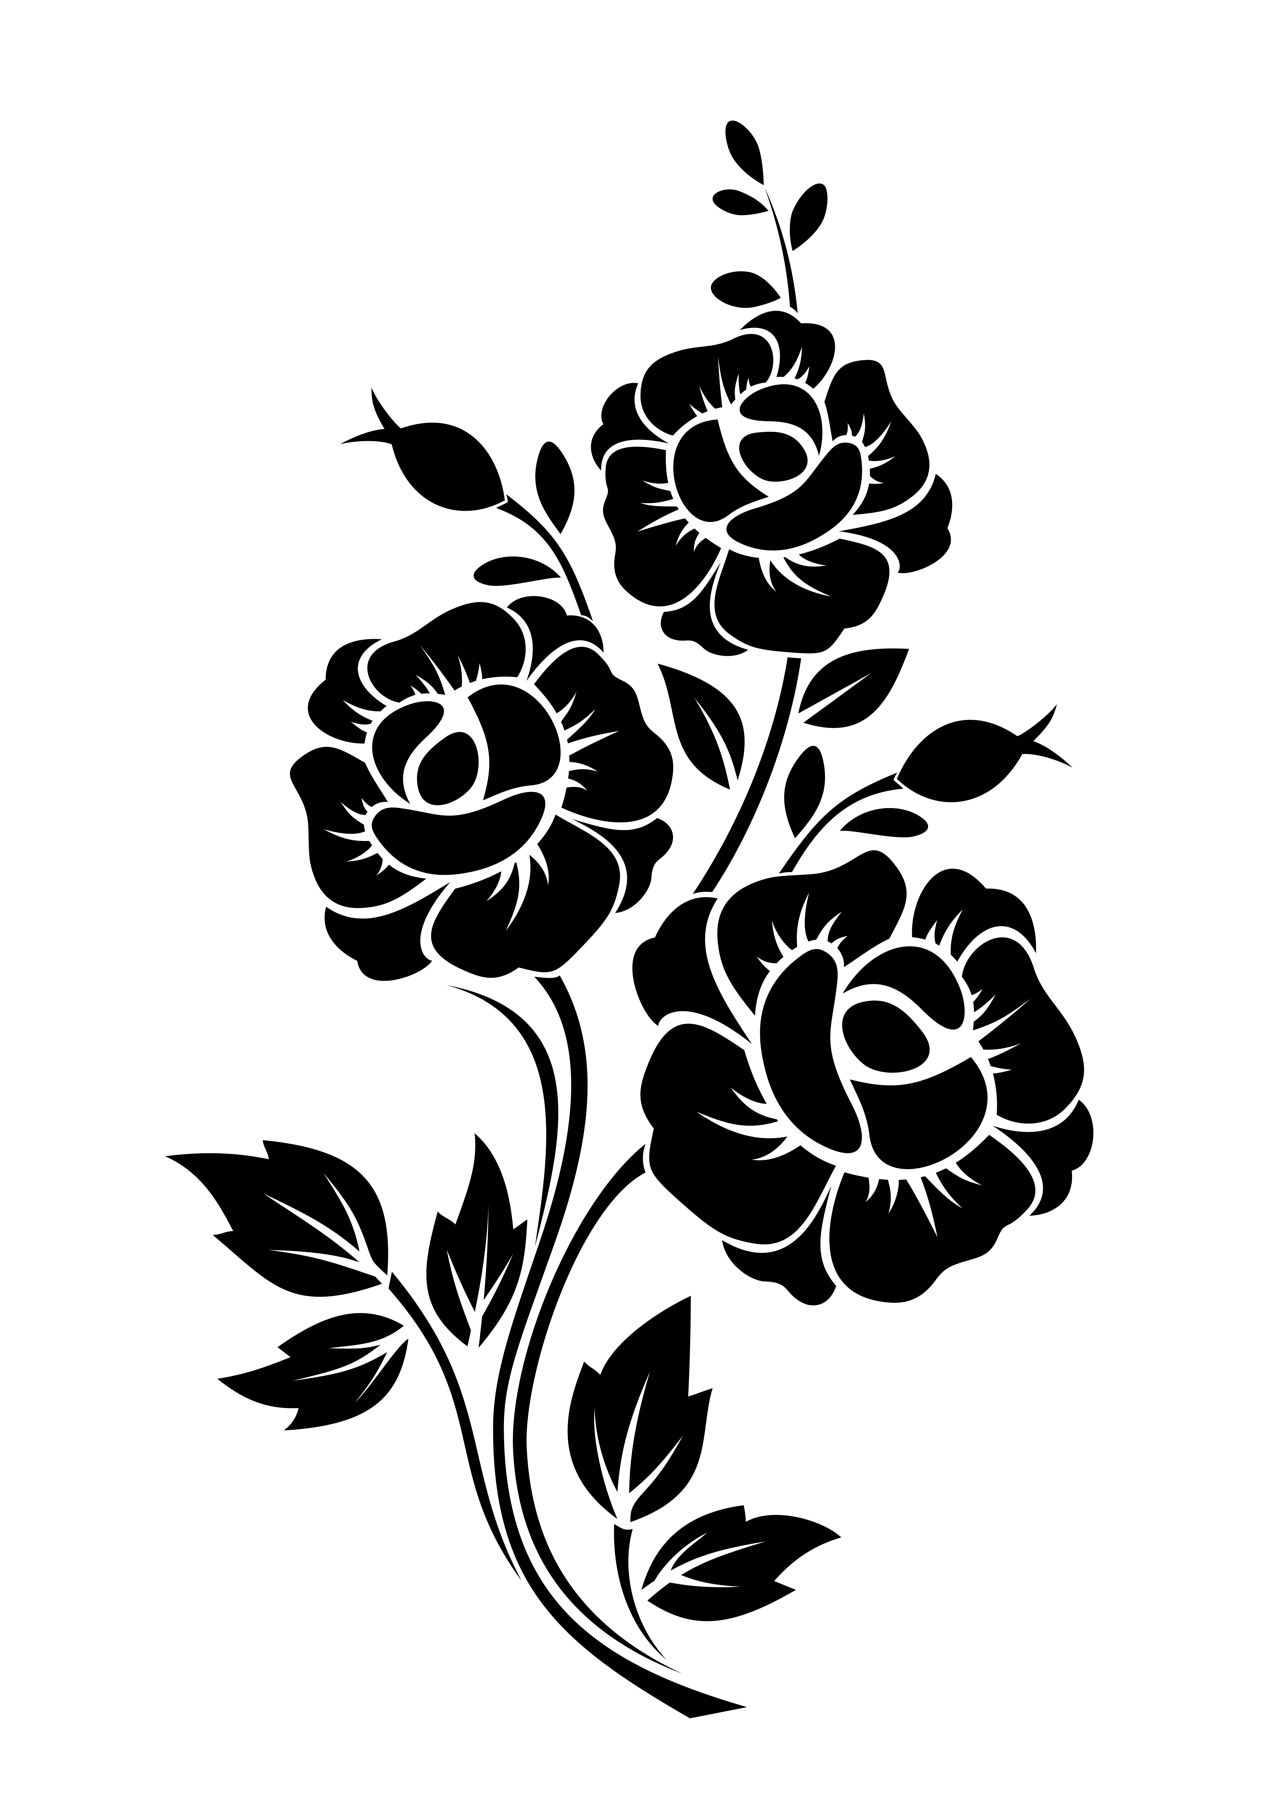 Download Elegant Rose Vine Tattoos That Will Pull at Your ...